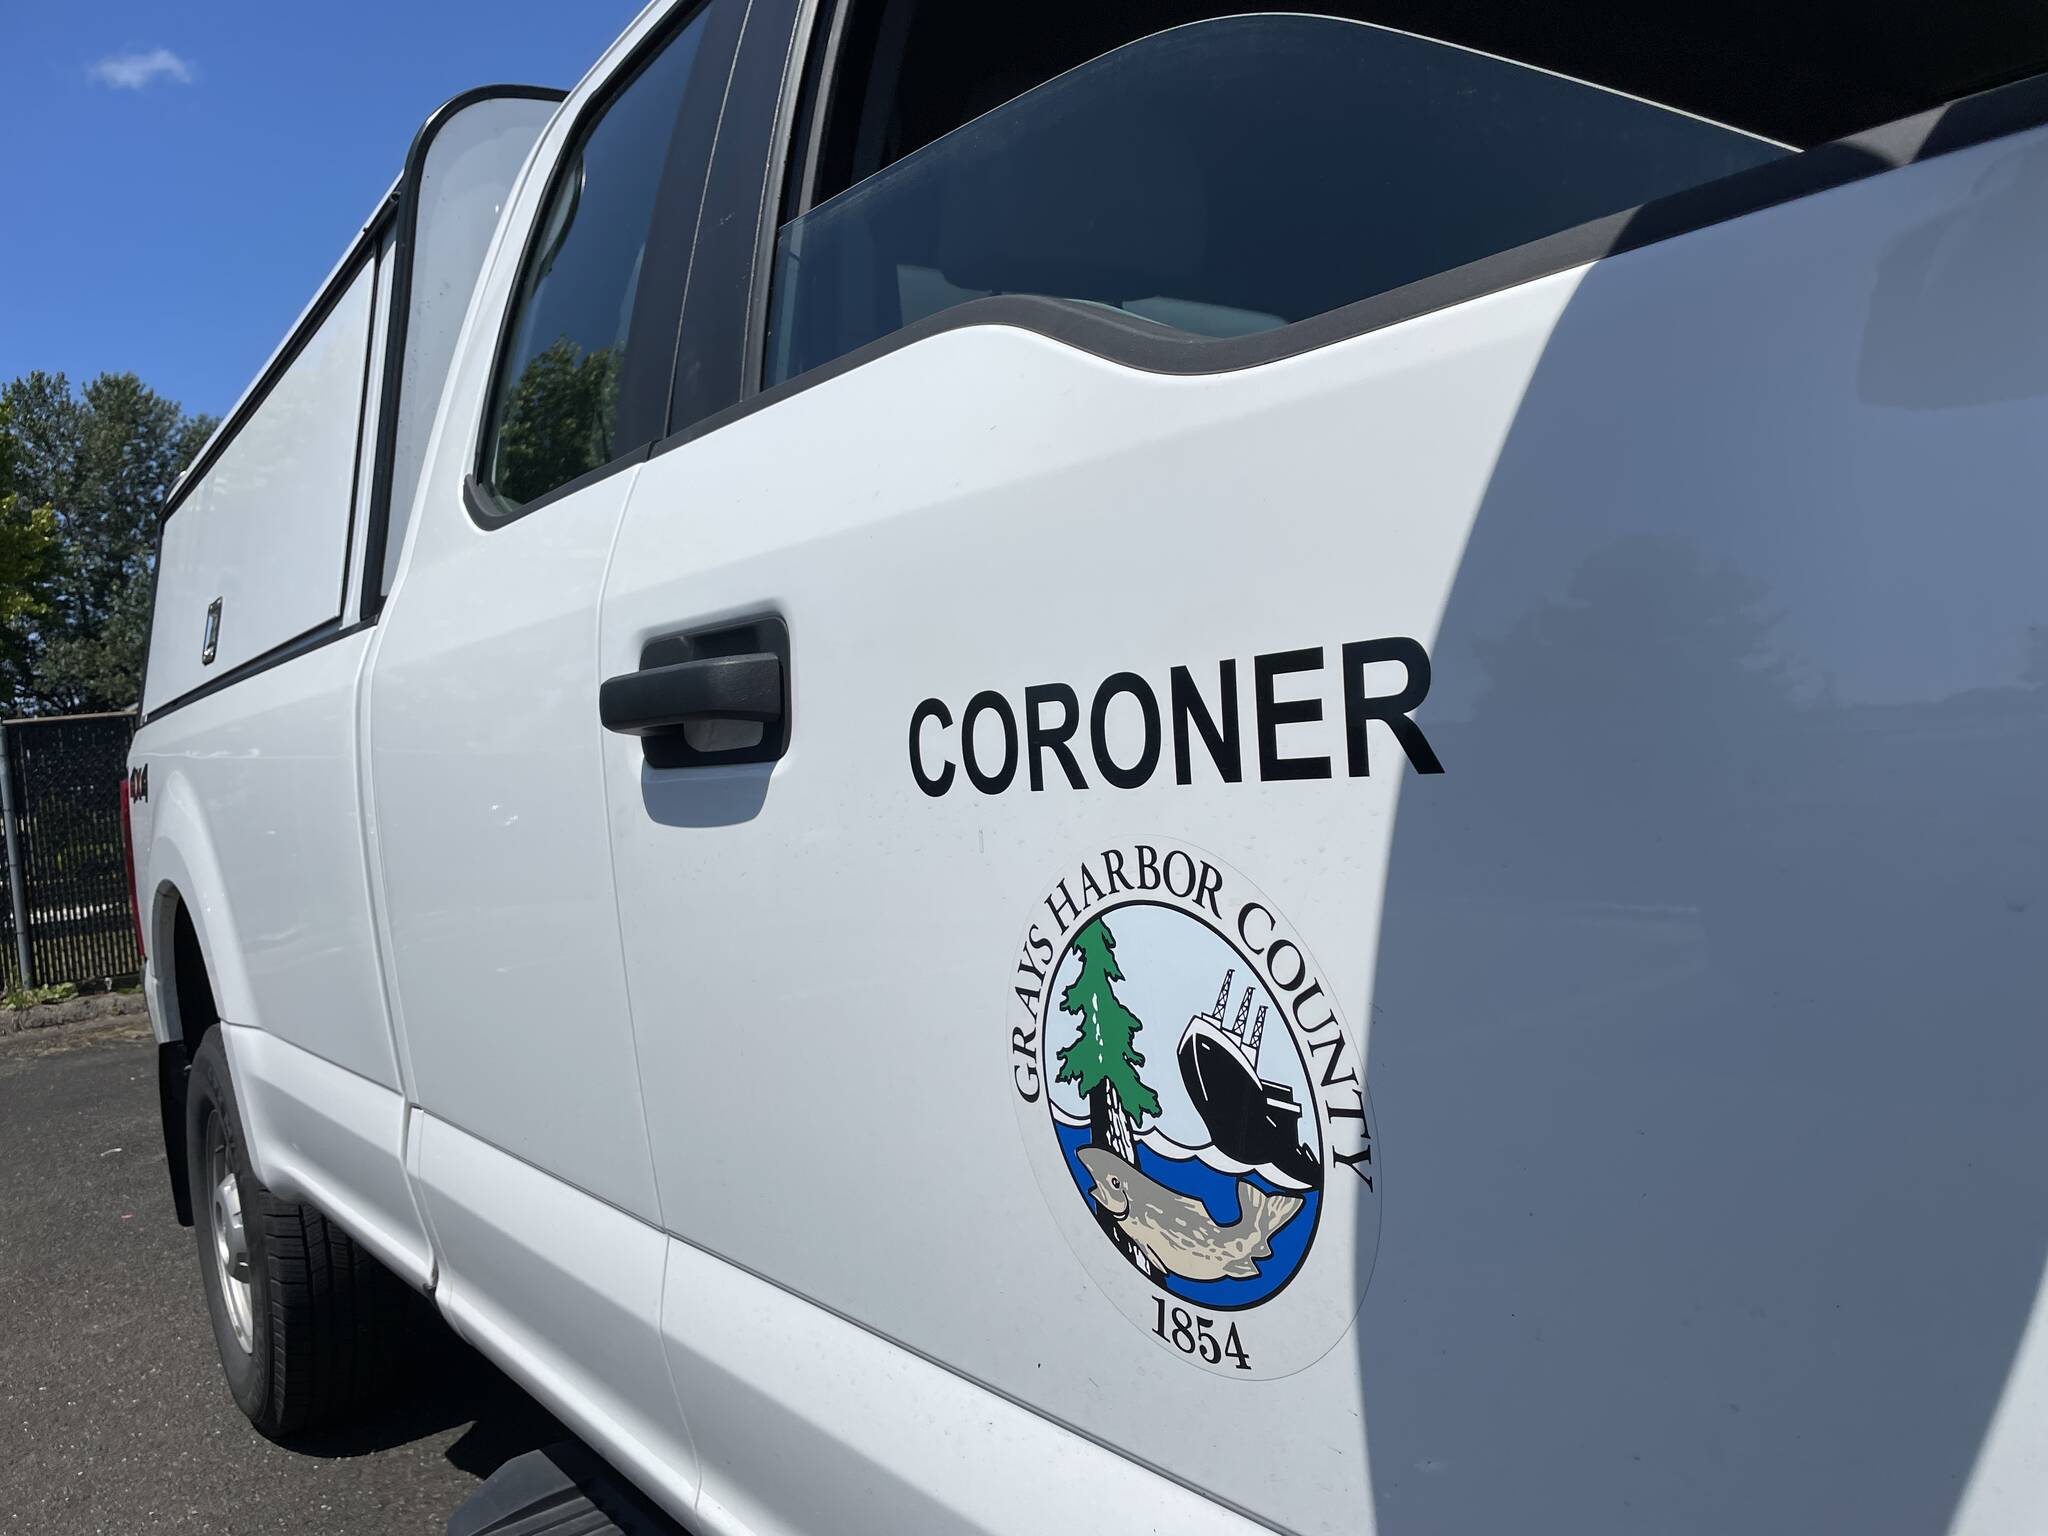 The Grays Harbor Coroner’s Office has expanded as it seeks to expand its role serving the community. (Michael S. Lockett / The Daily World)